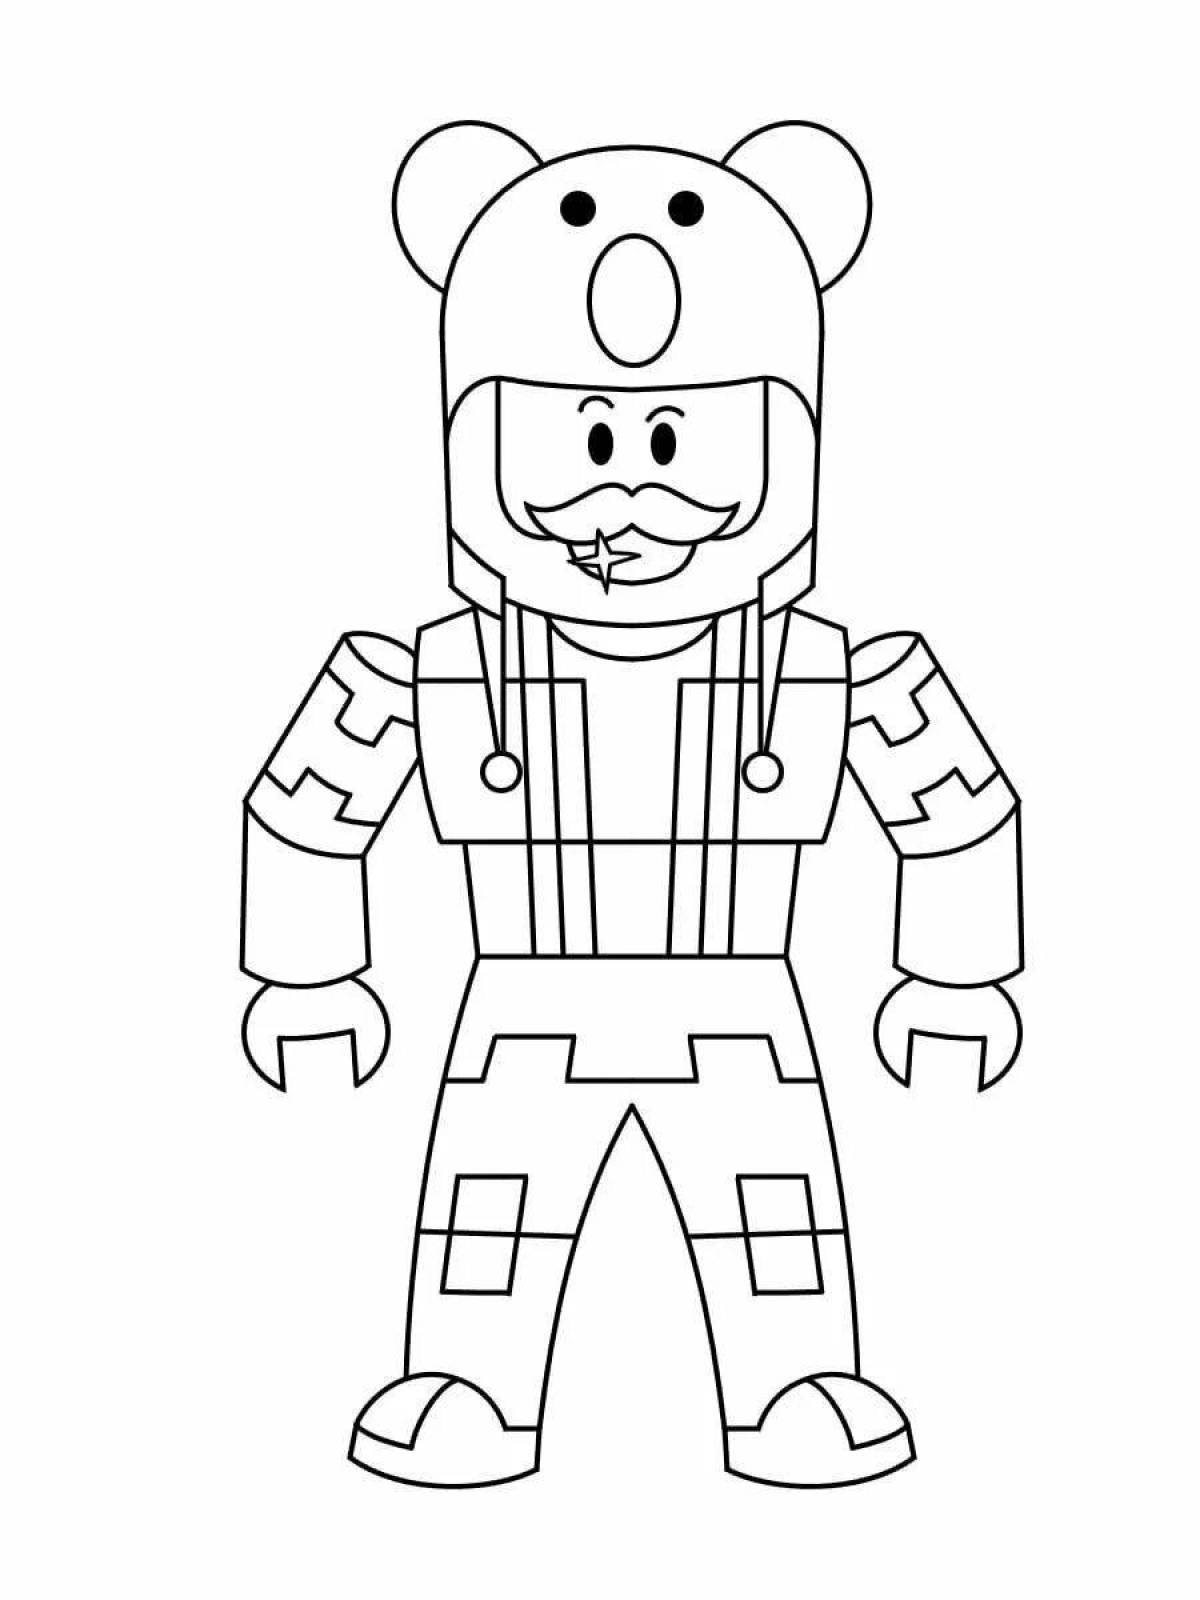 Roblox character coloring page with crazy color